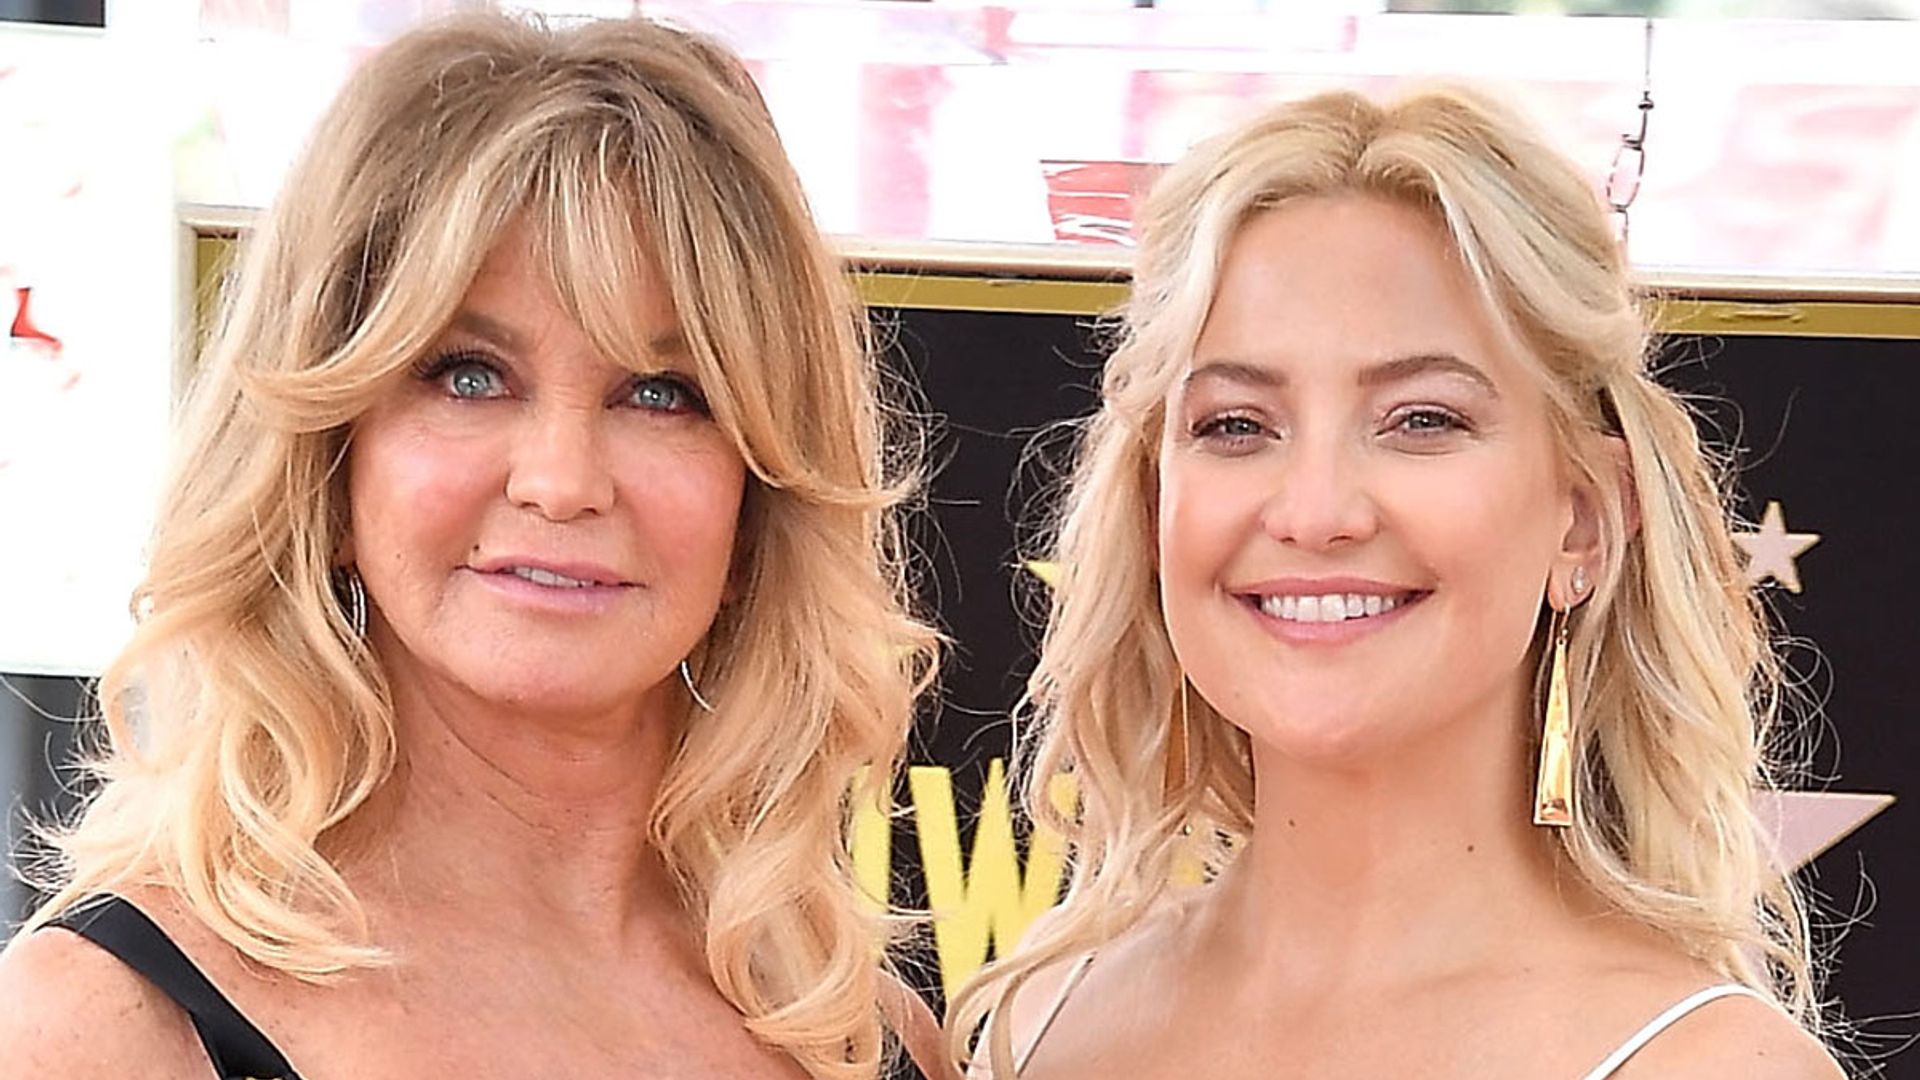 dræbe Til Ni lytter Kate Hudson shares heart-melting baby photo with Goldie Hawn - fans go wild  | HELLO!